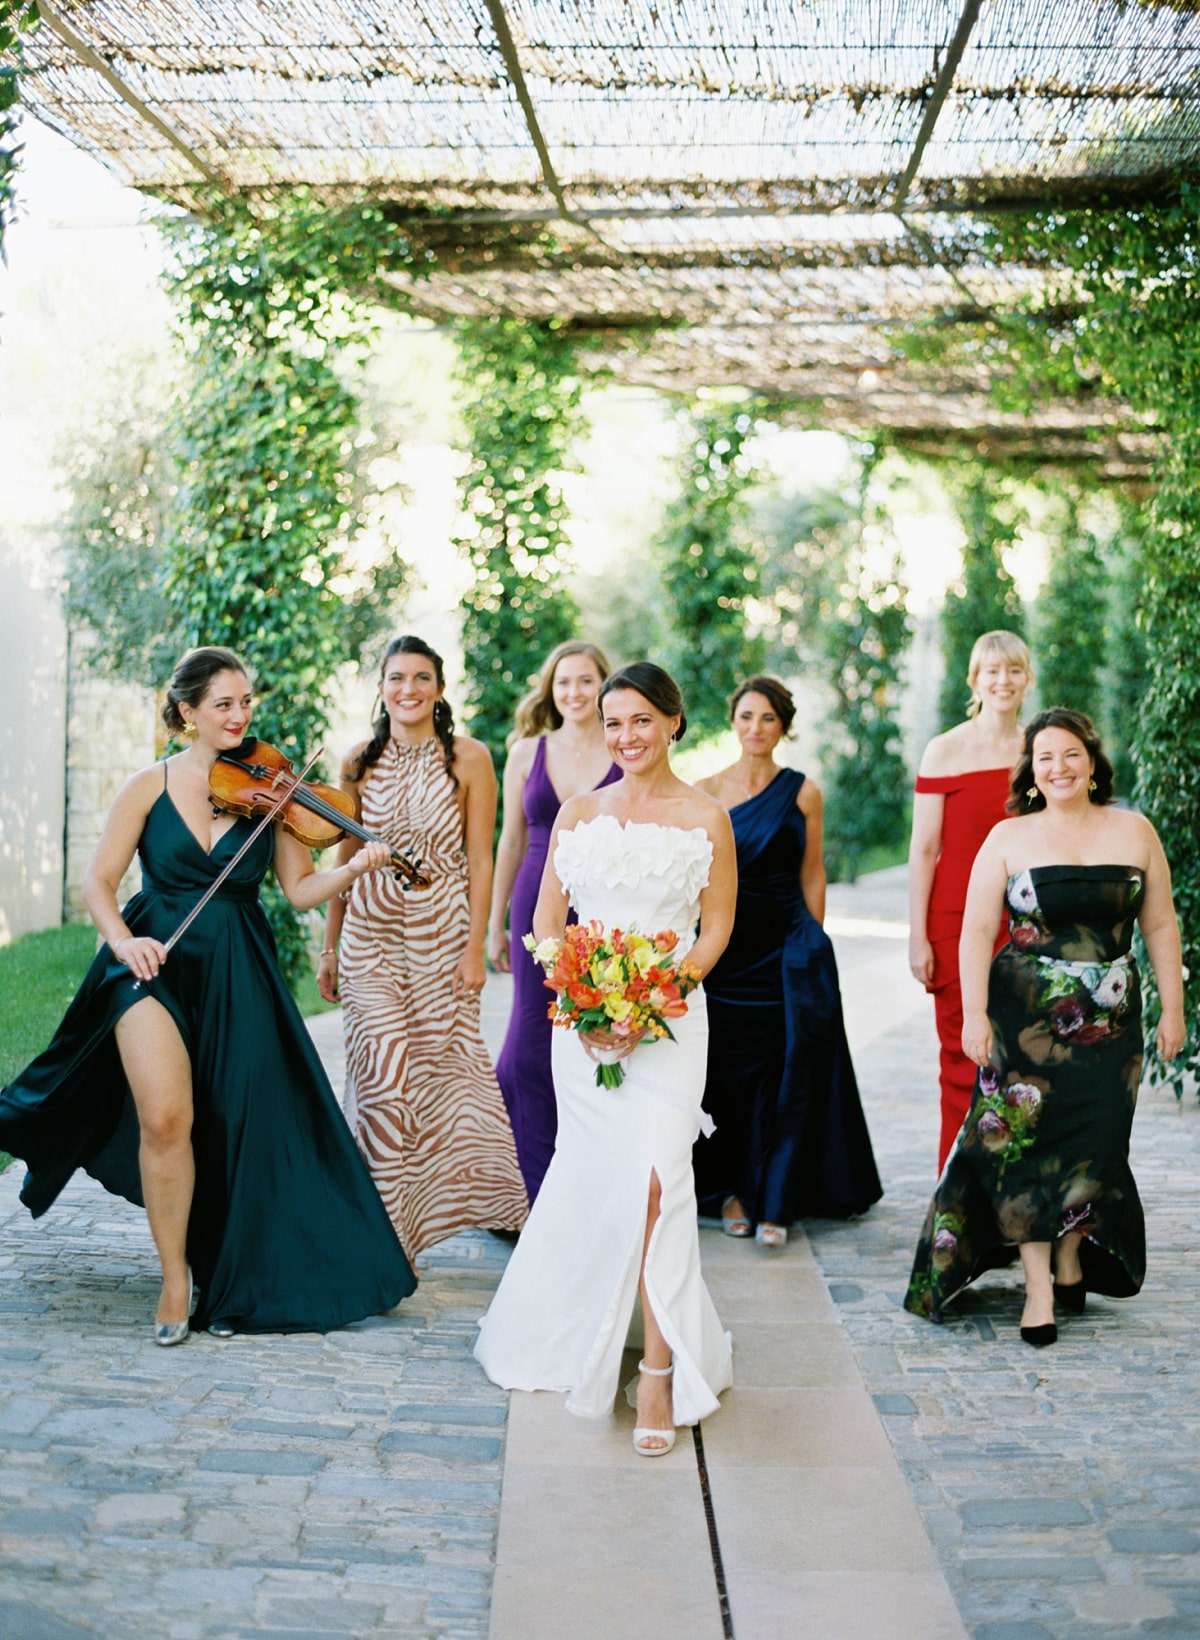 Bride and bridesmaids - Wedding Planner Provence